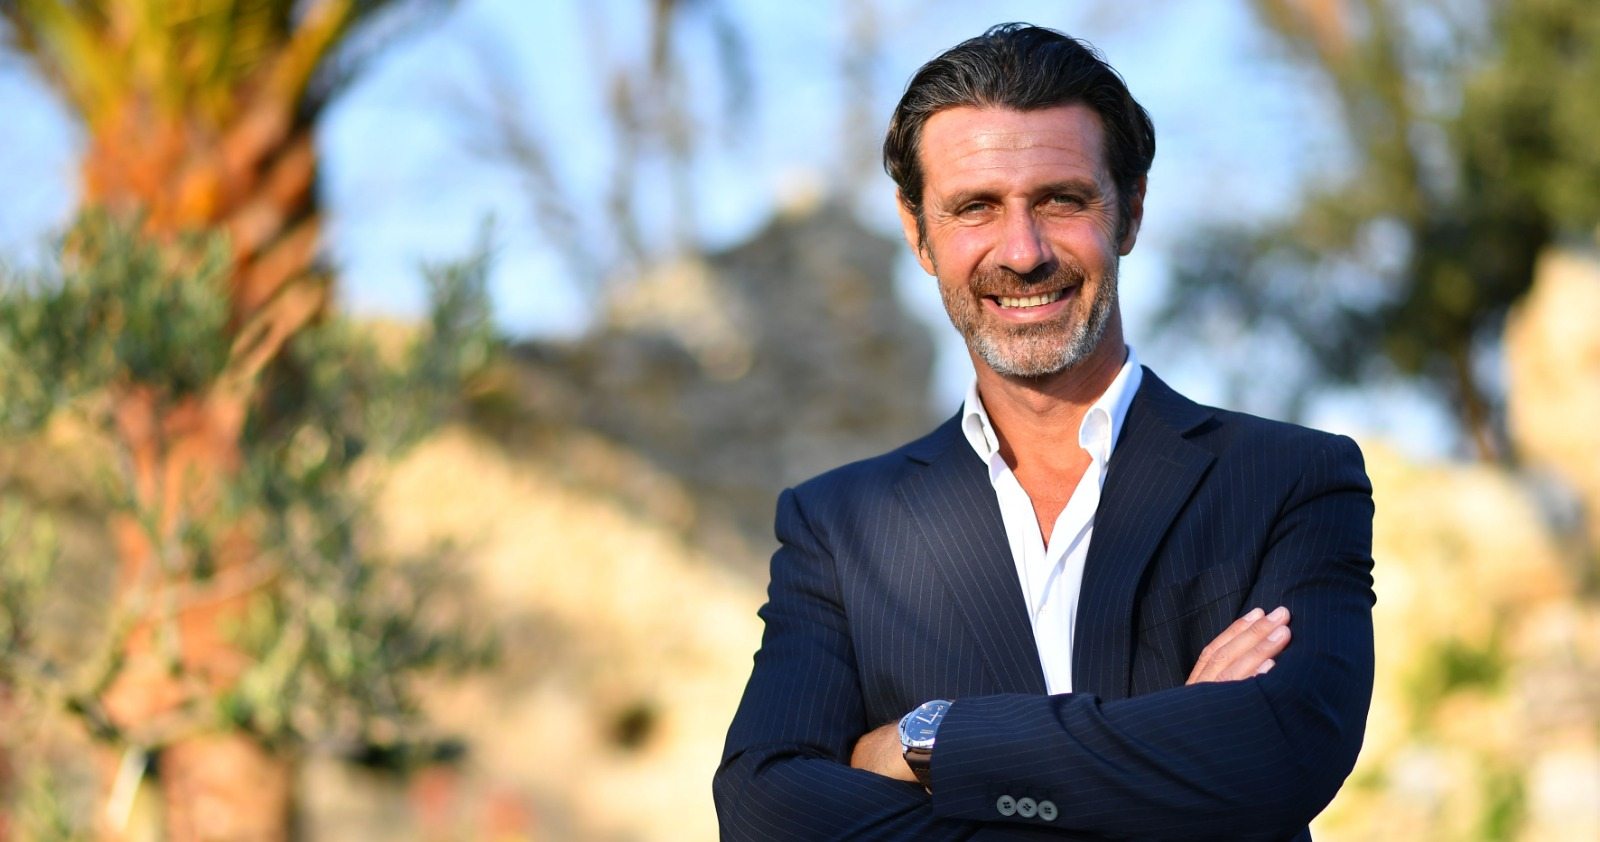 French coach Patrick Mouratoglou founded his Tennis Academy in 1996